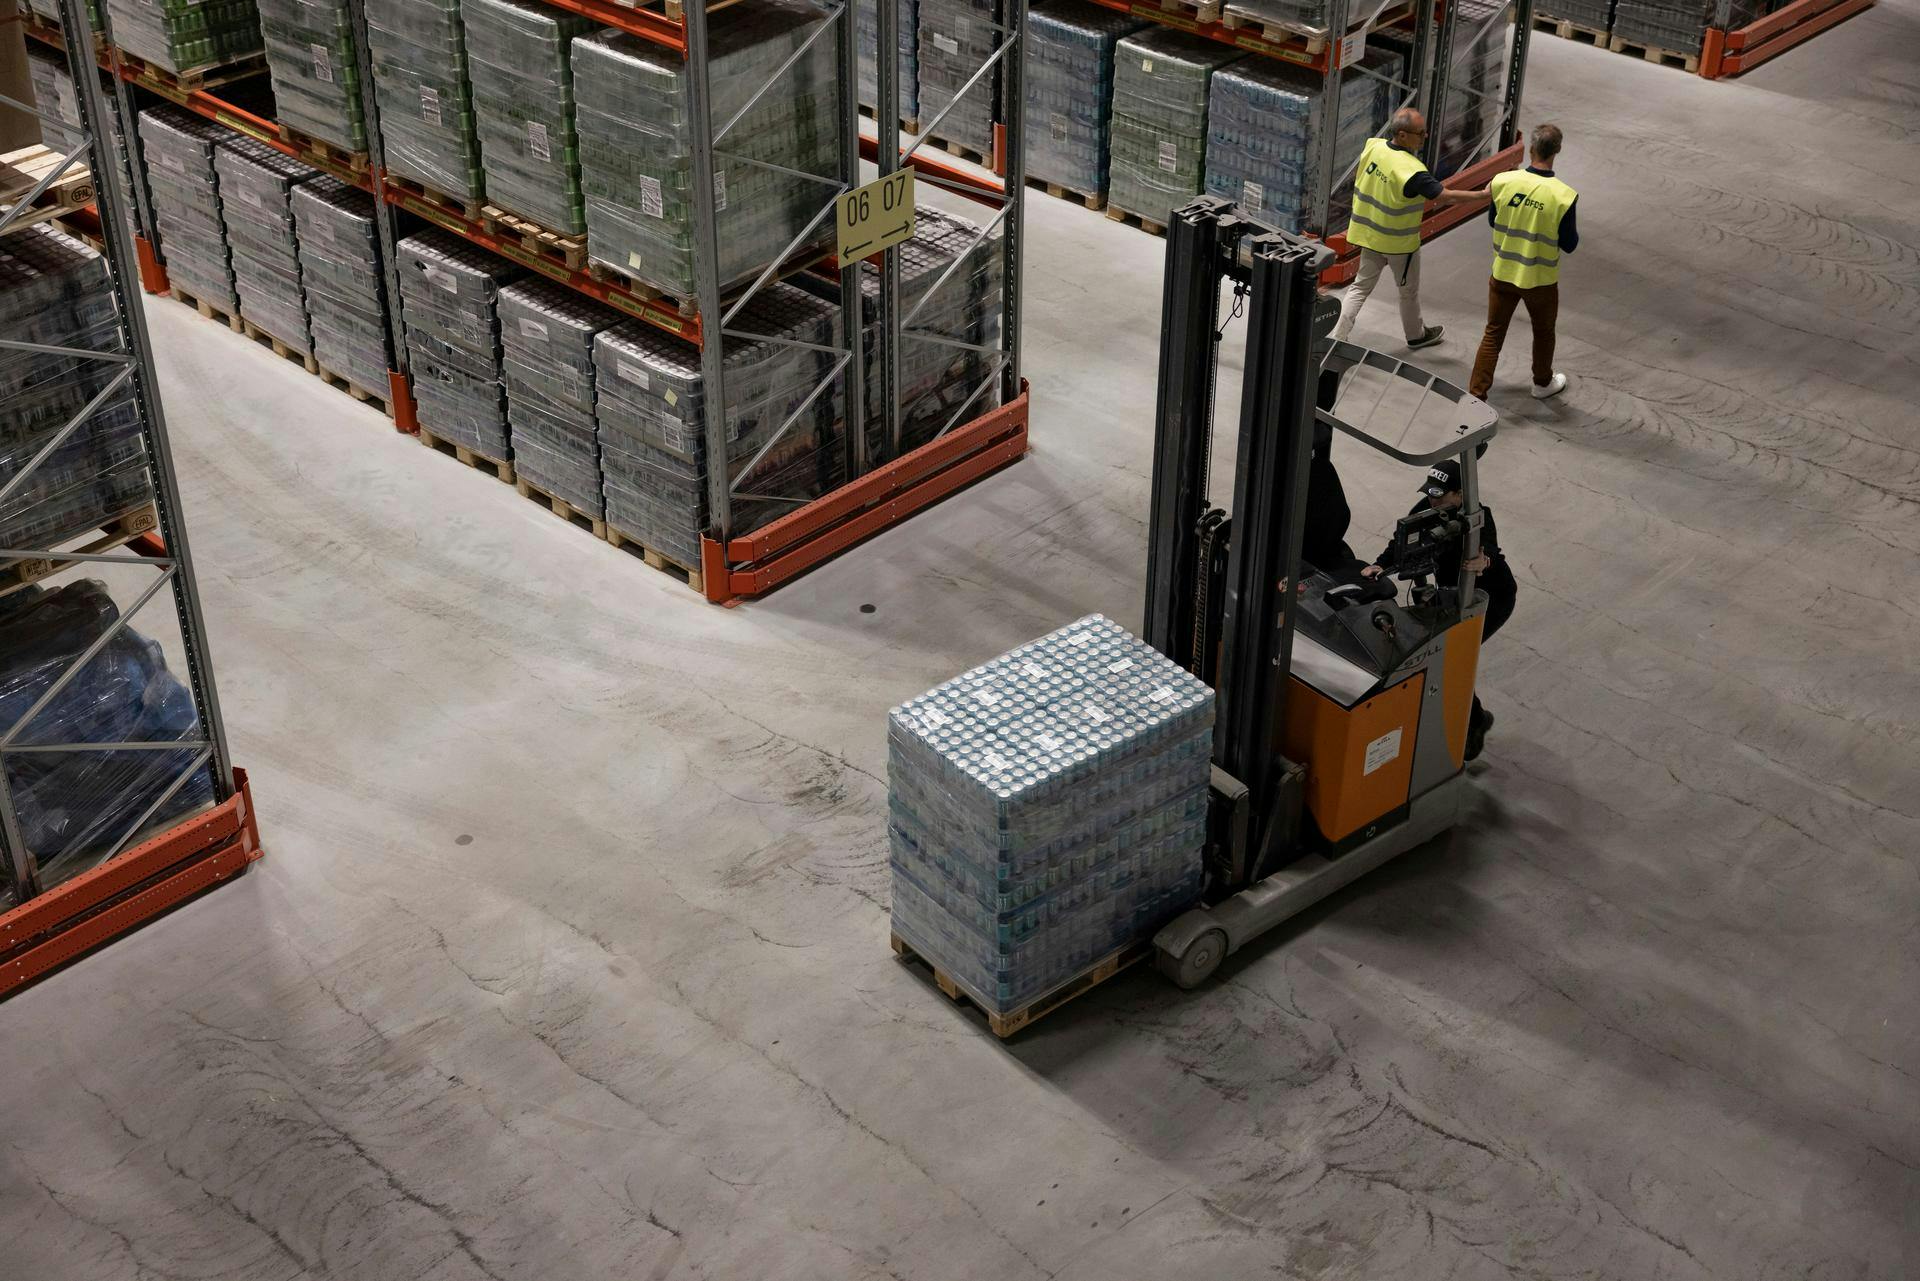 Warehouse, inside warehouse, contract logistics, worker with product